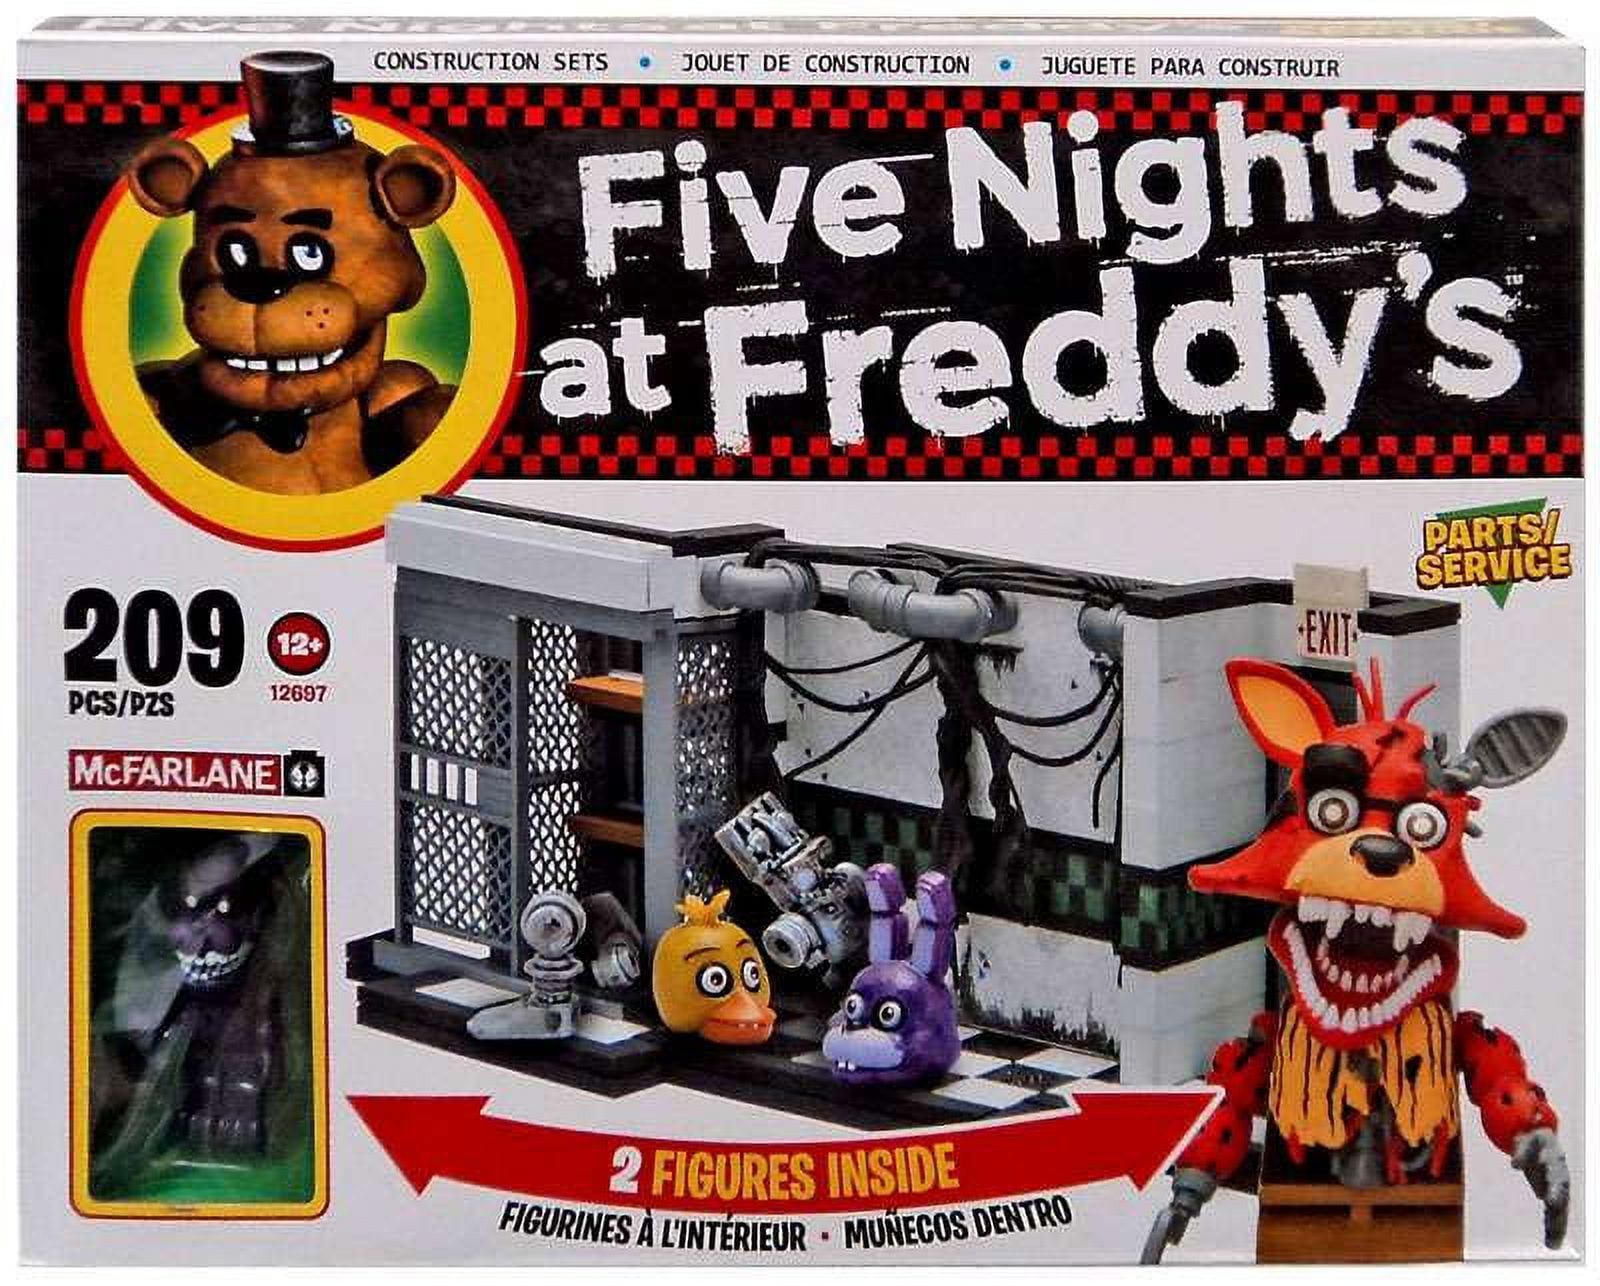 Latest Five Nights at Freddy's game pulled from Steam - BBC News